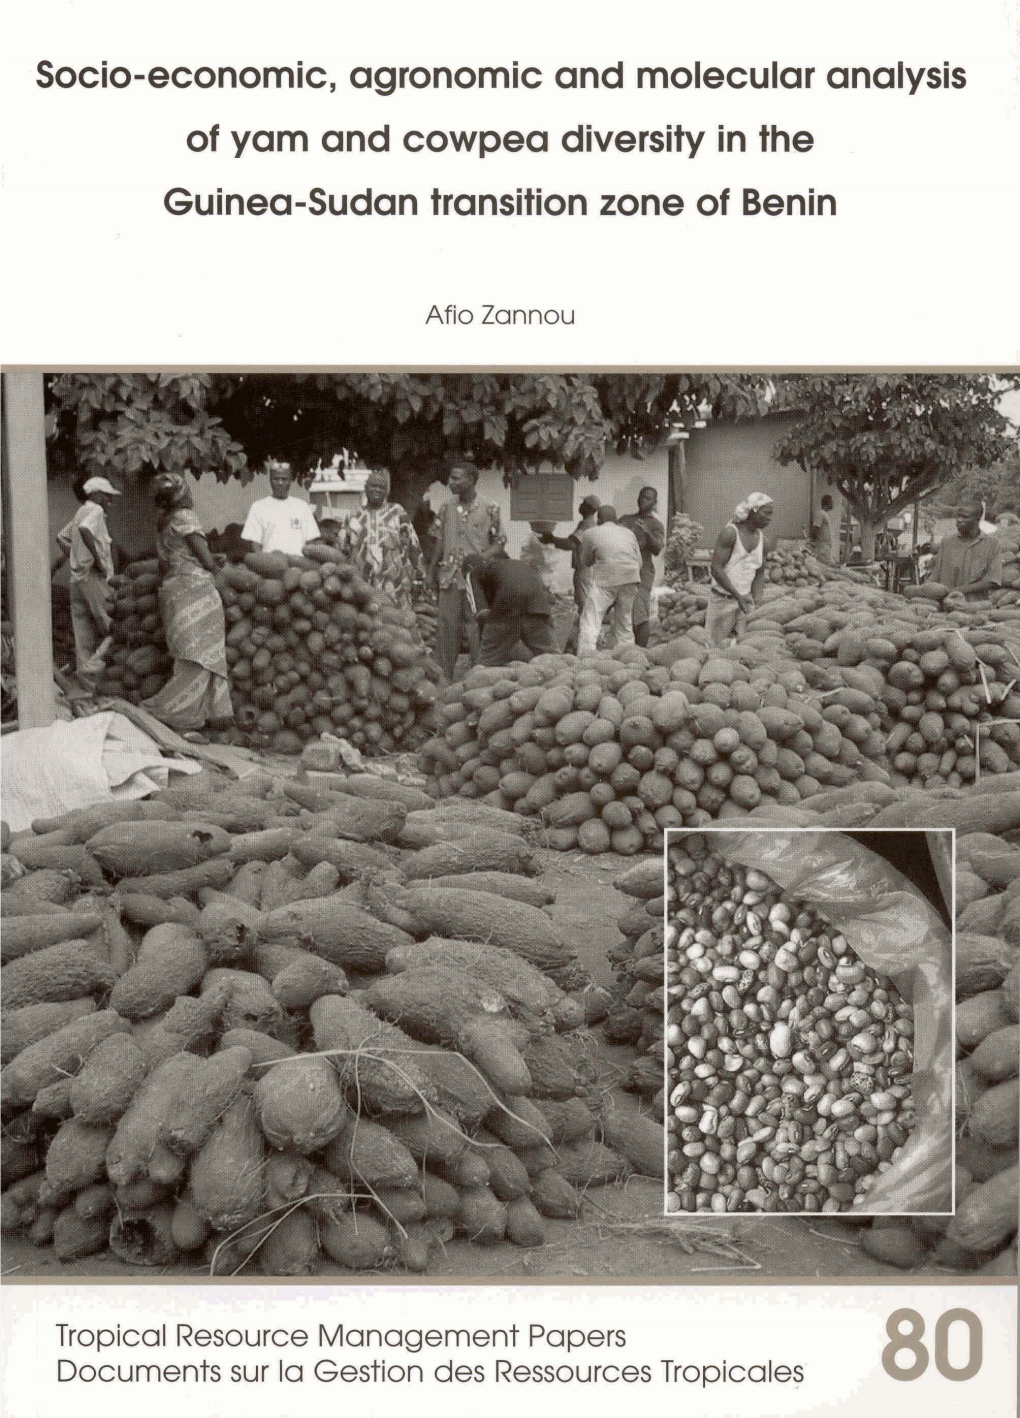 Socio-Economic, Agronomic and Molecular Analysis of Yam and Cowpea Diversity in the Guinea-Sudan Transition Zone of Benin